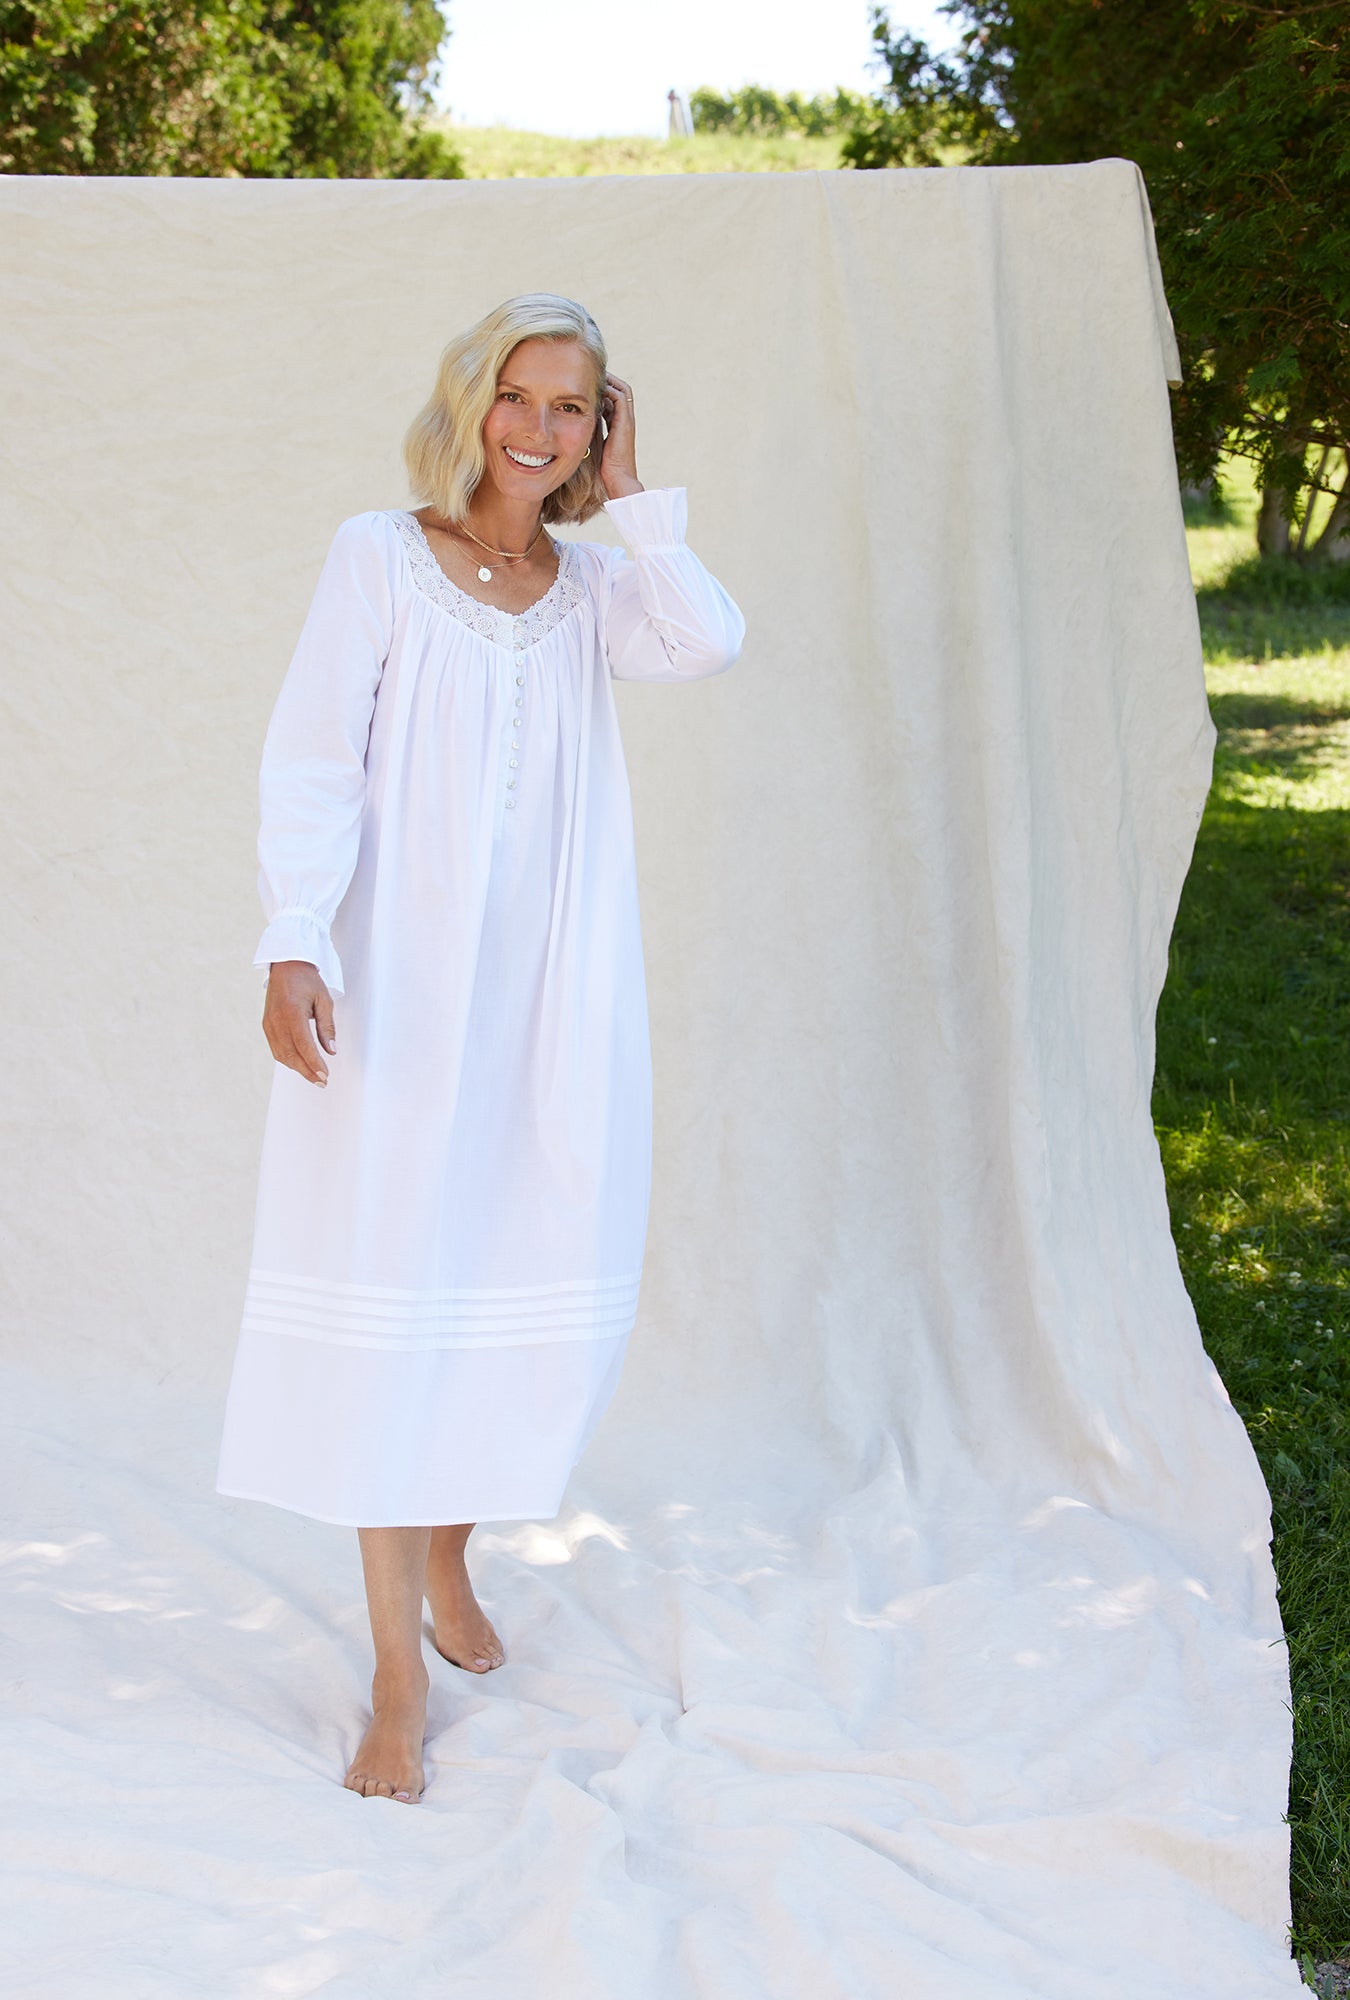 A lady wearing a white long sleeve cotton nightgown.